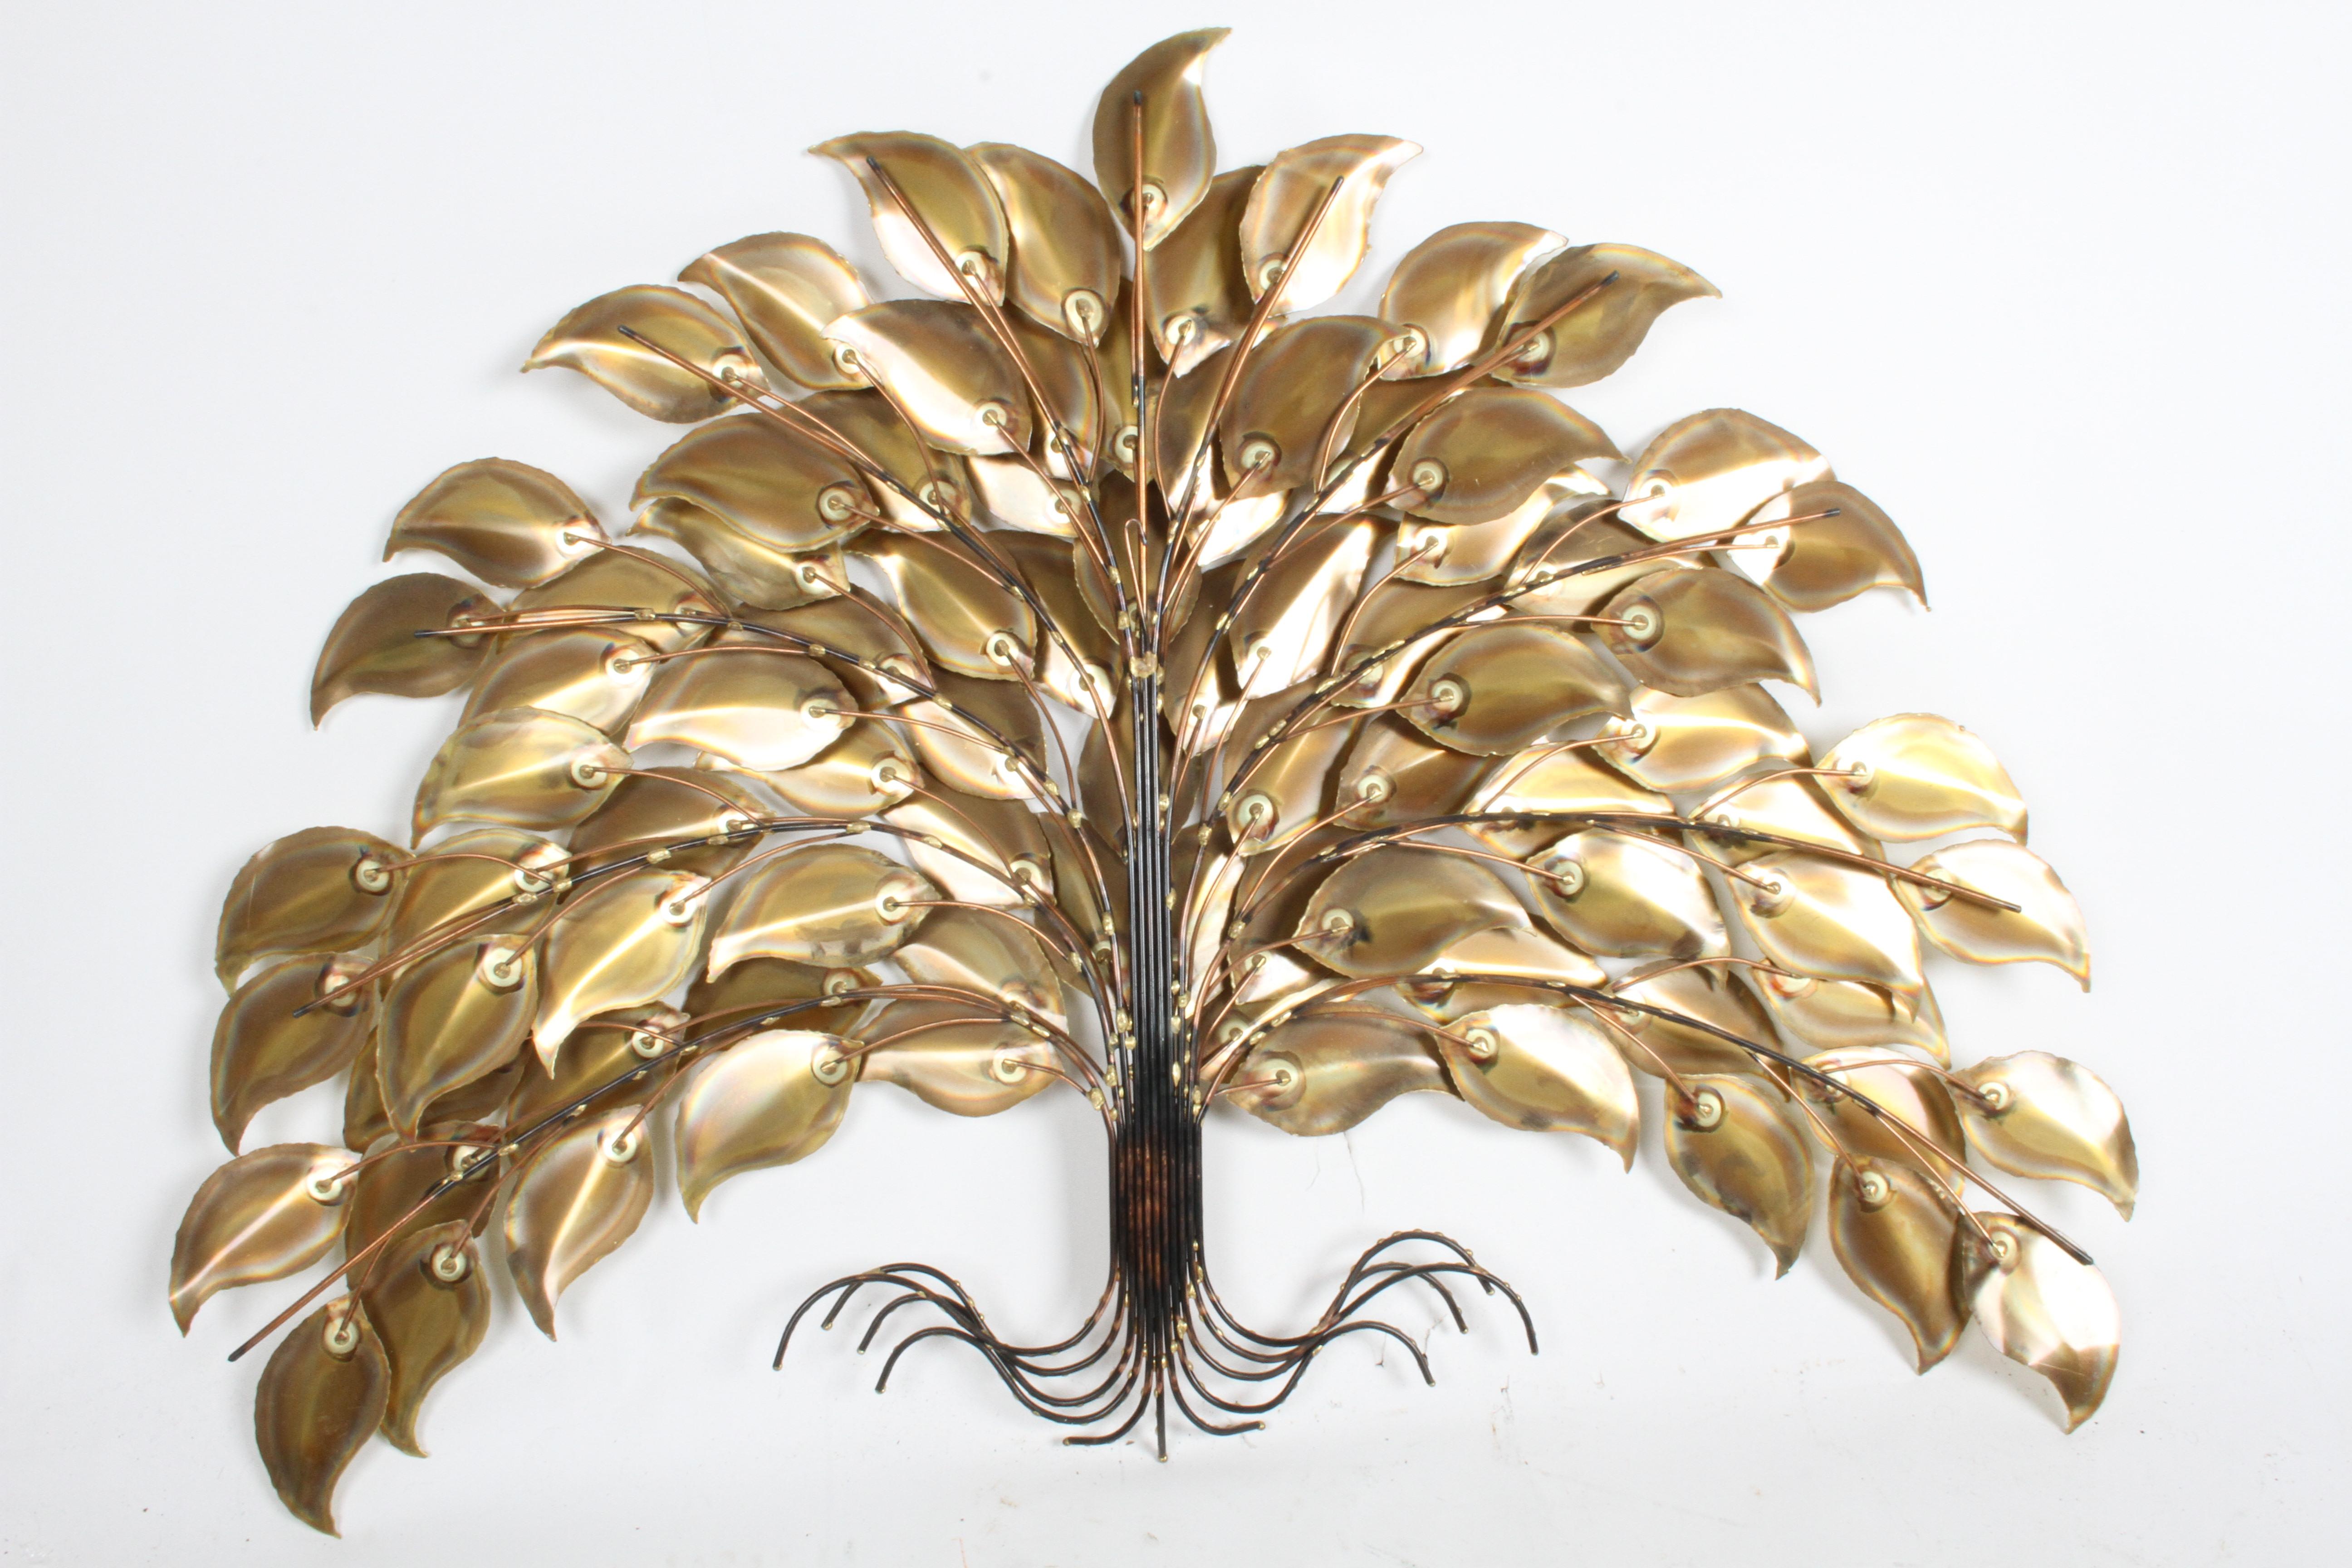 1970s Wall Sculpture of a Tree with Brass Leaves & Copper Trunk Style of C.Jeré For Sale 1